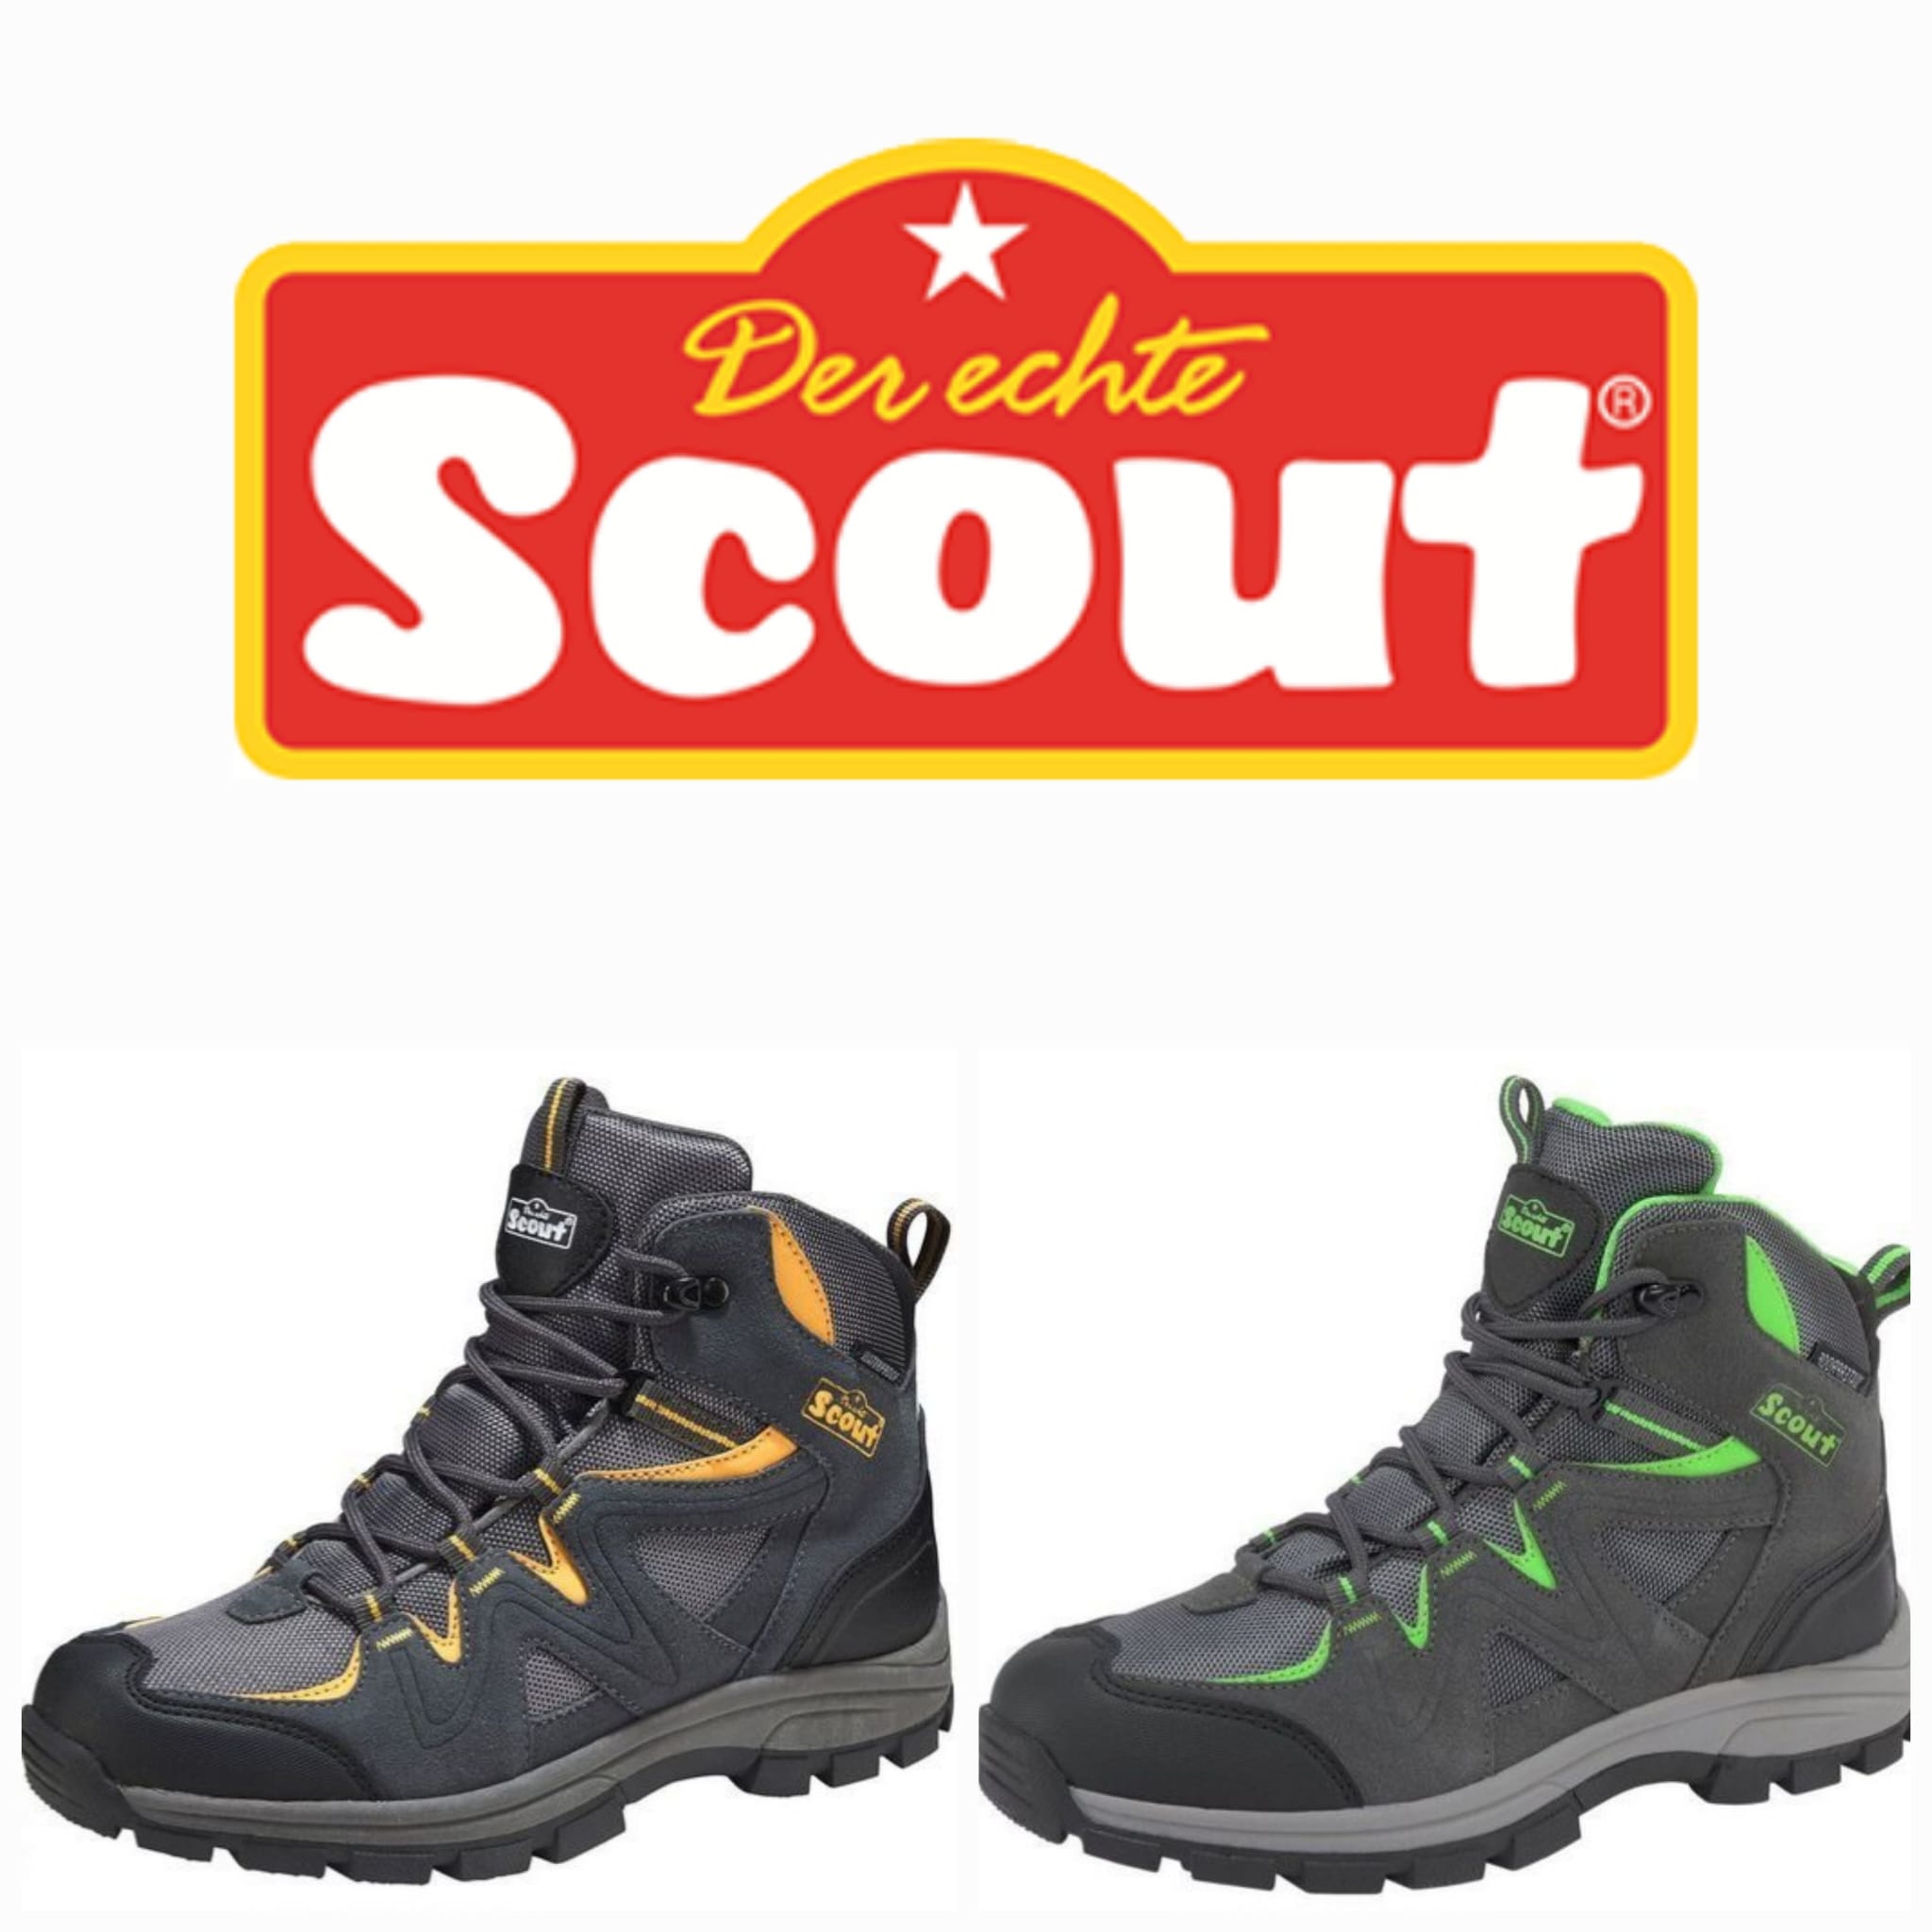 Unisex trekking boots from Scout